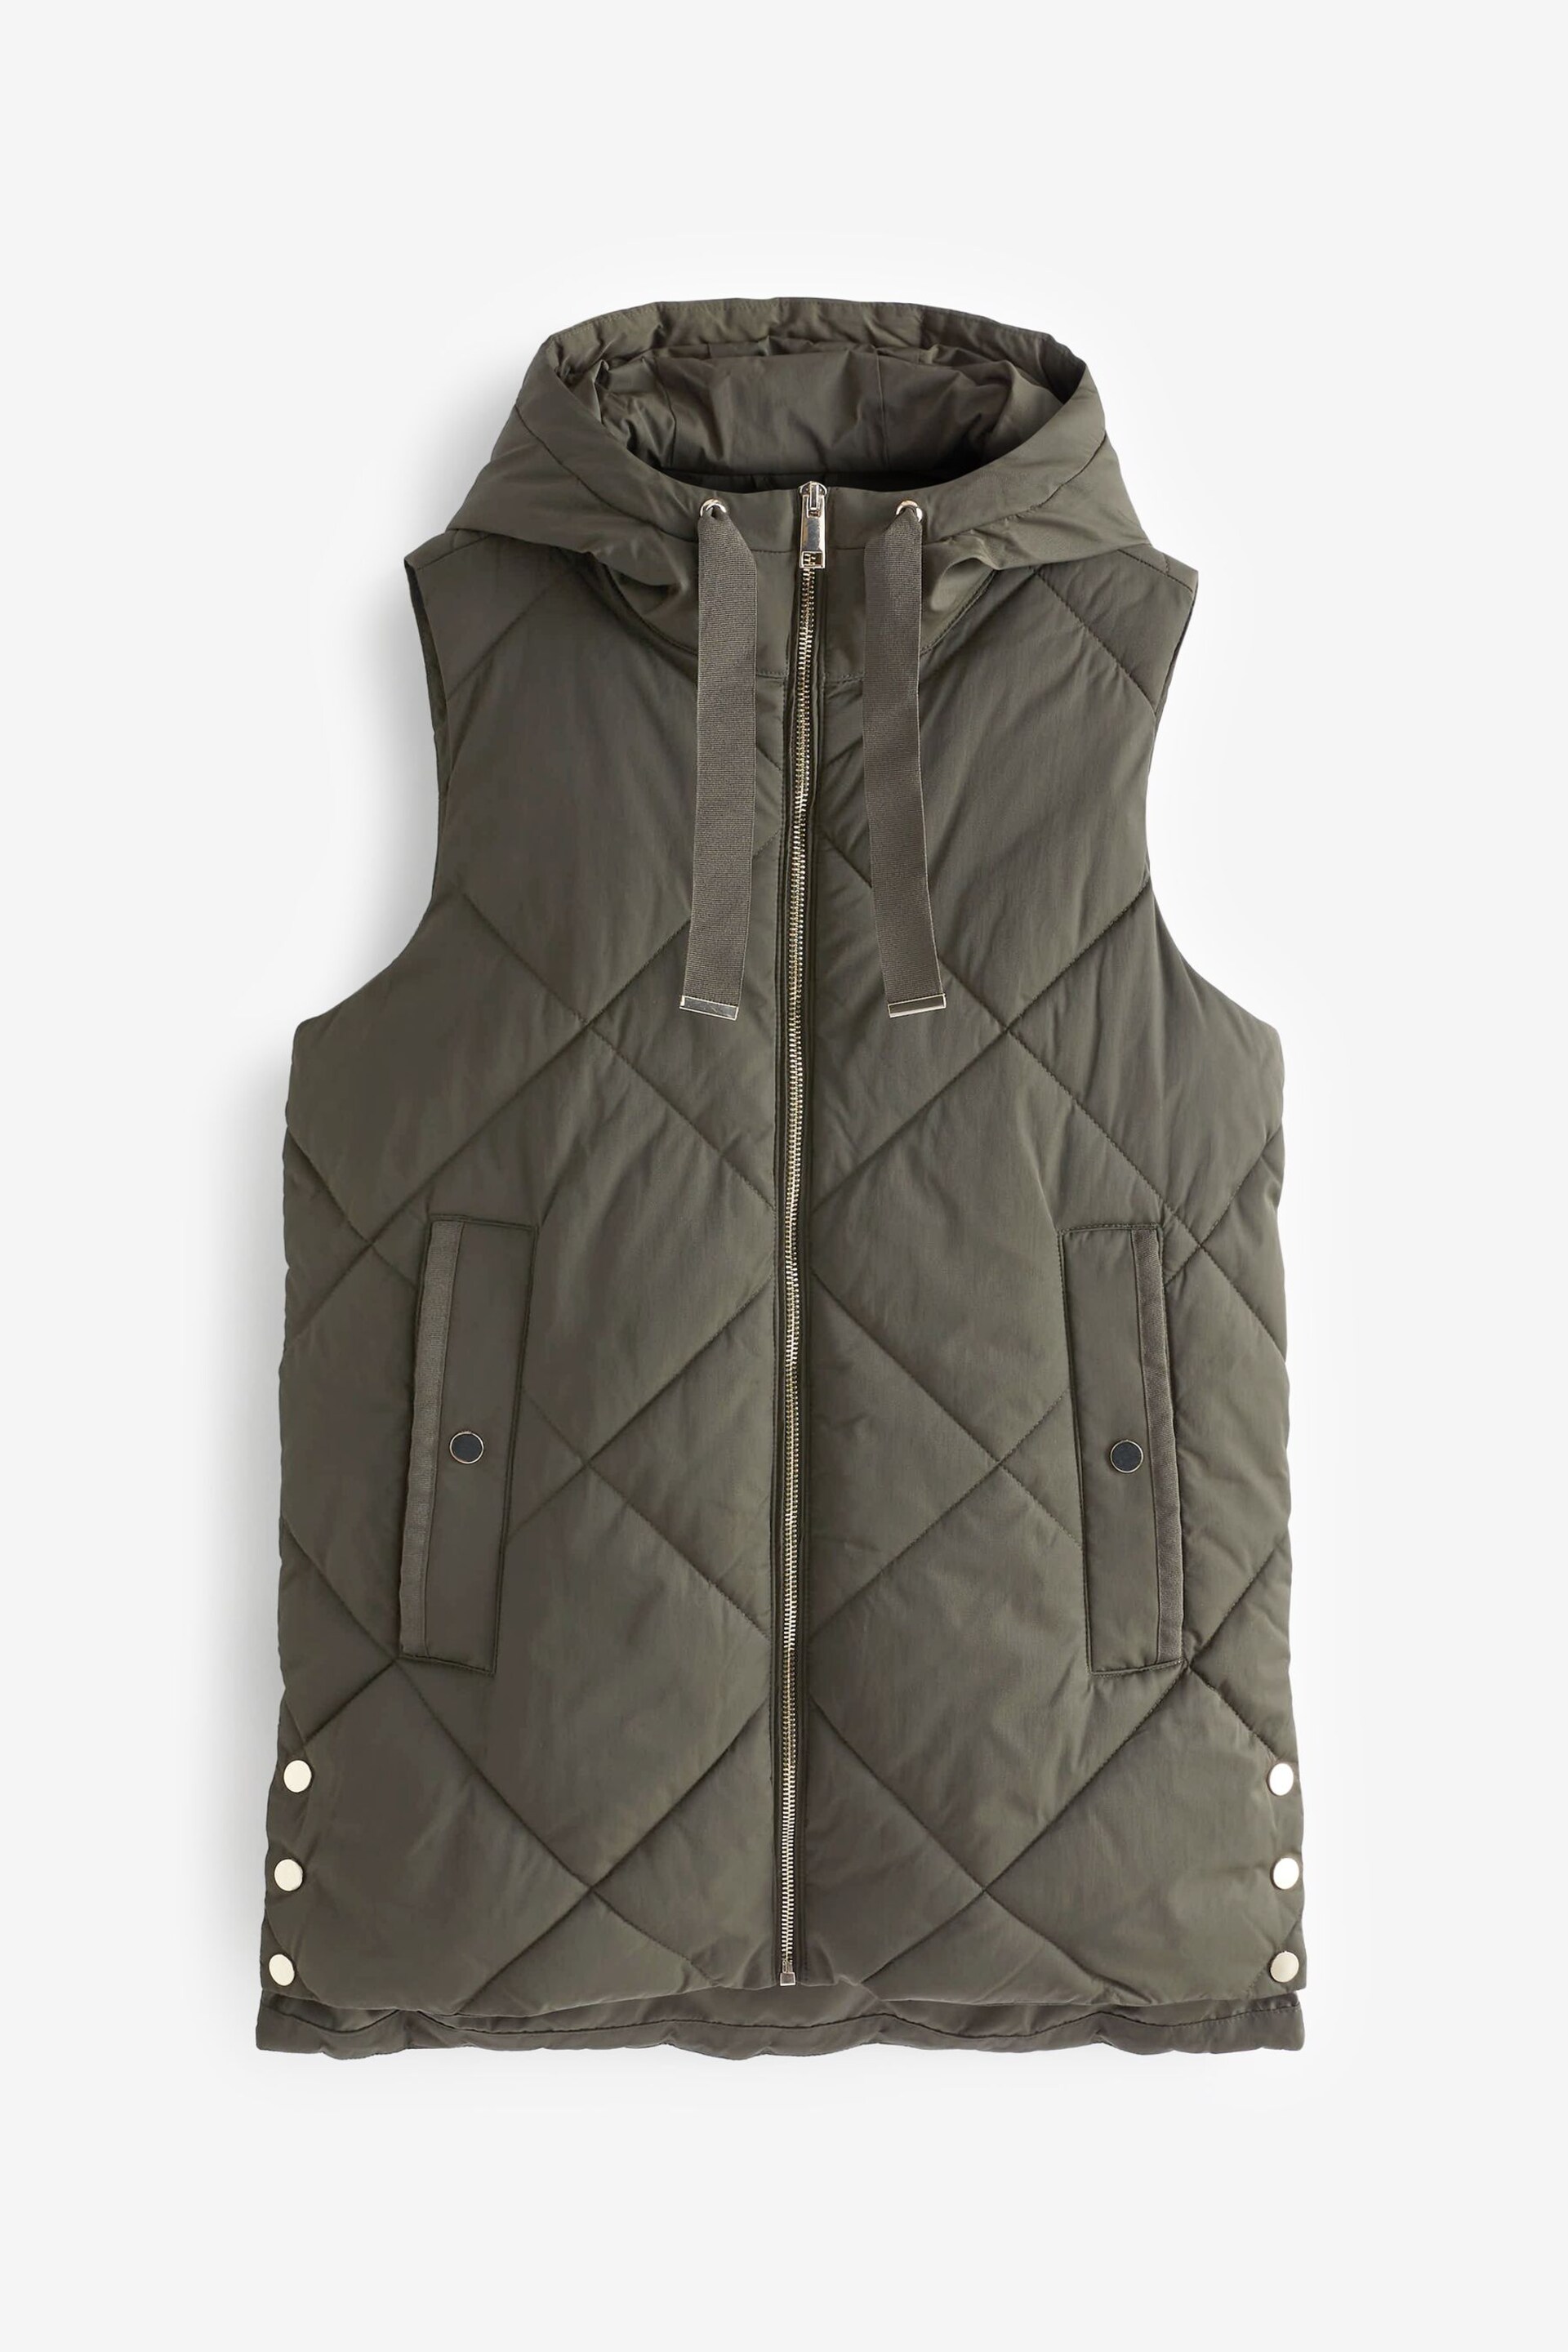 Khaki Green Quilted Gilet - Image 6 of 7